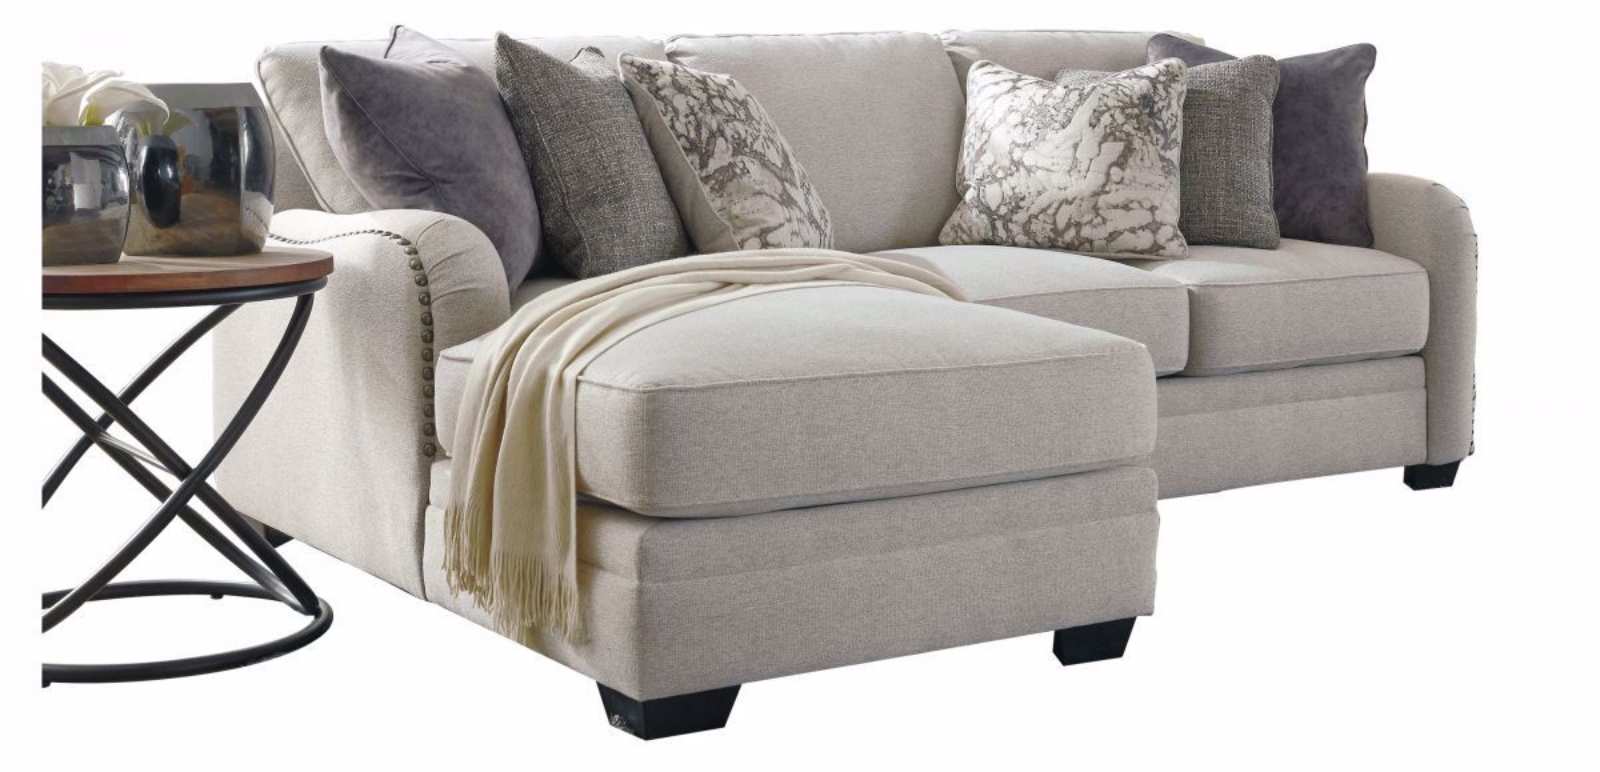 Picture of Dellara Sectional